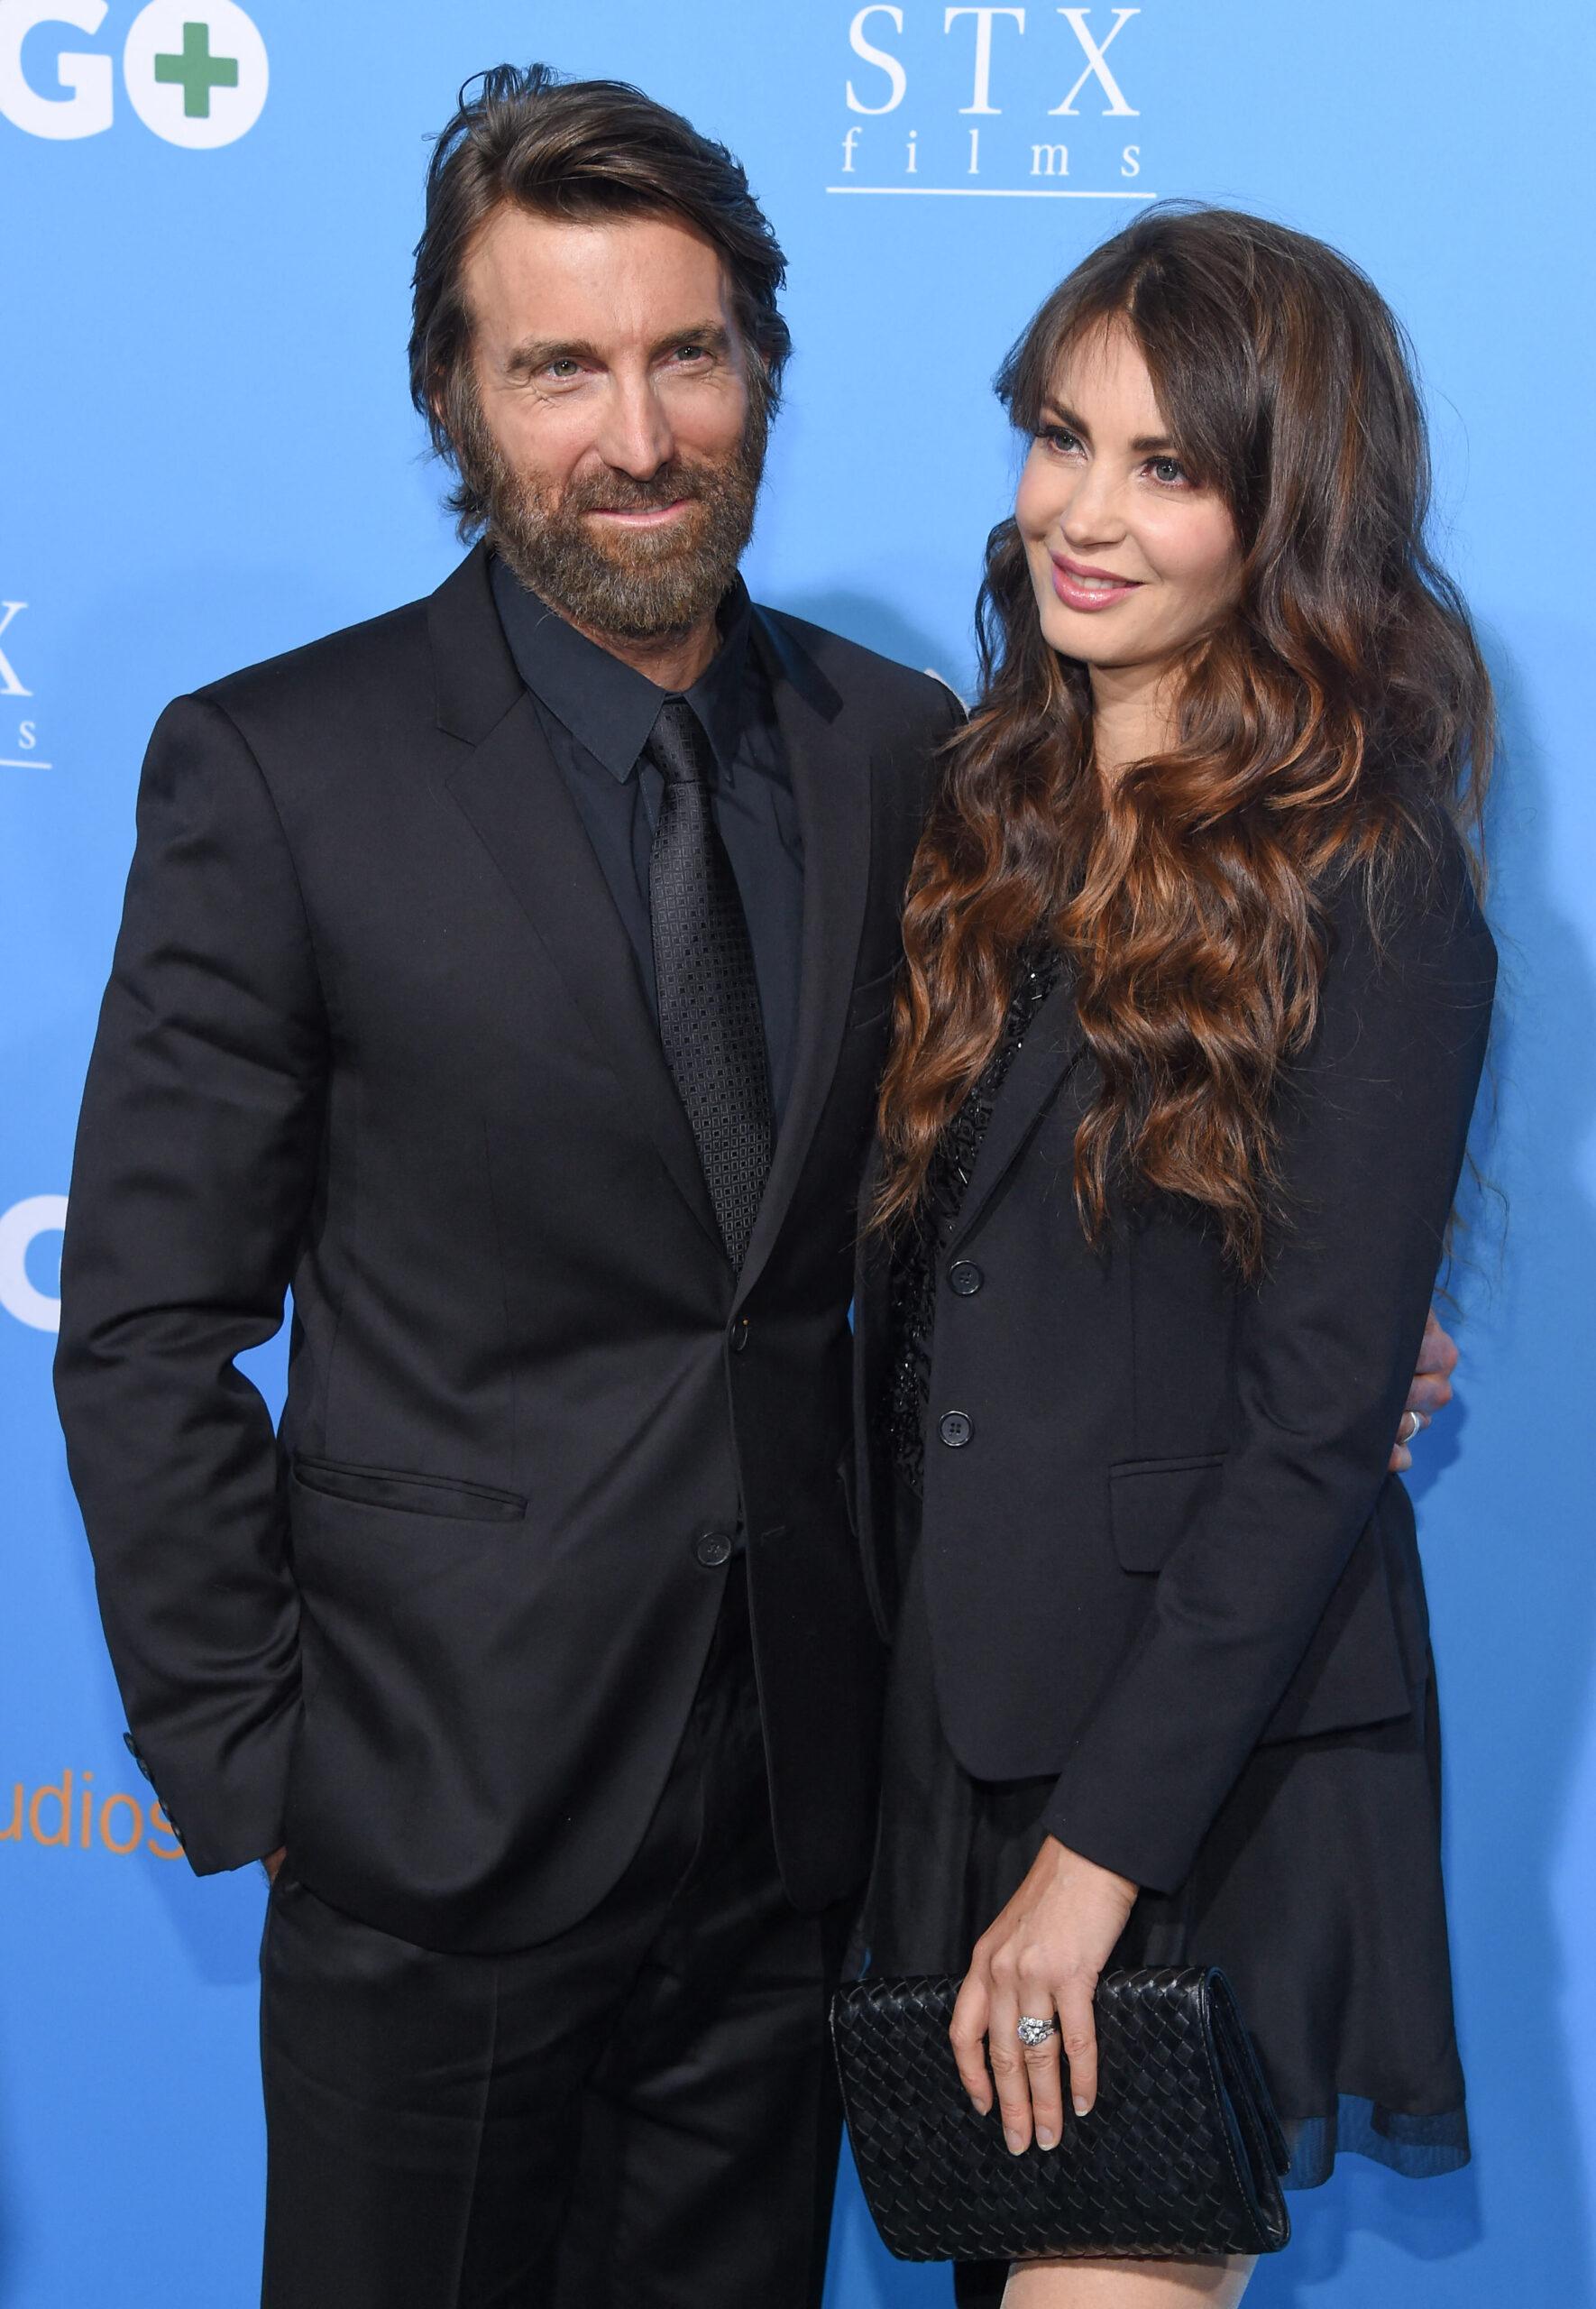 'District 9' Star Sharlto Copley Files For Divorce From Model Wife Tanit Phoenix